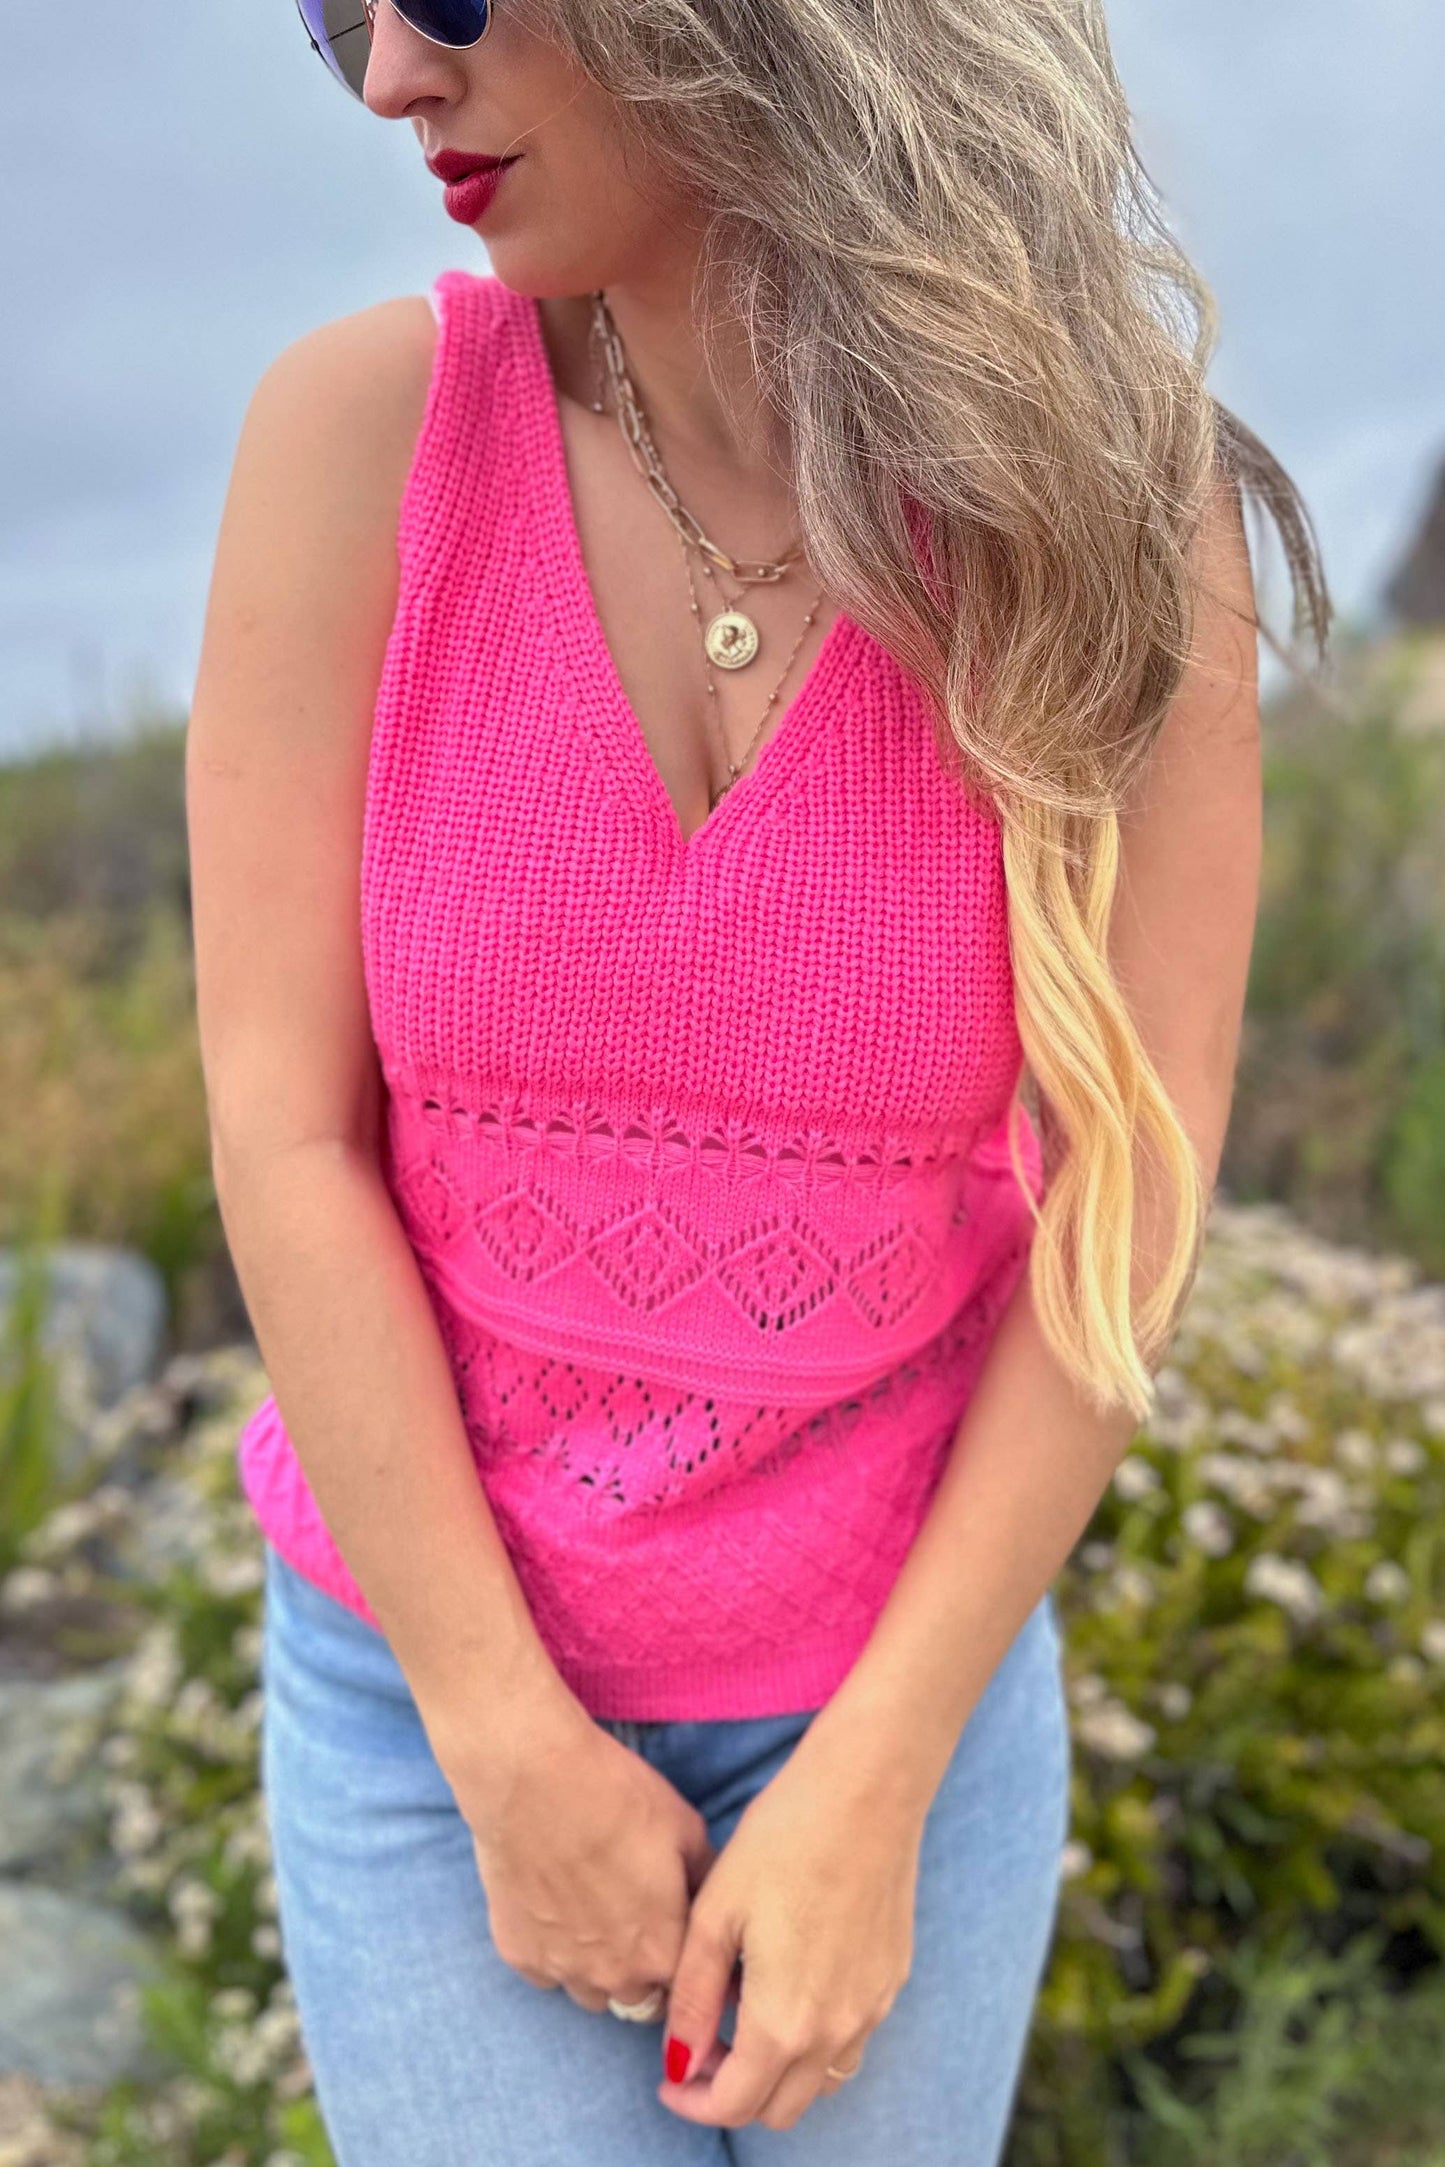 AMOLI - Neon Pink Textured Knit V Neck Sweater Tank Top: M/L / Neon Pink $45